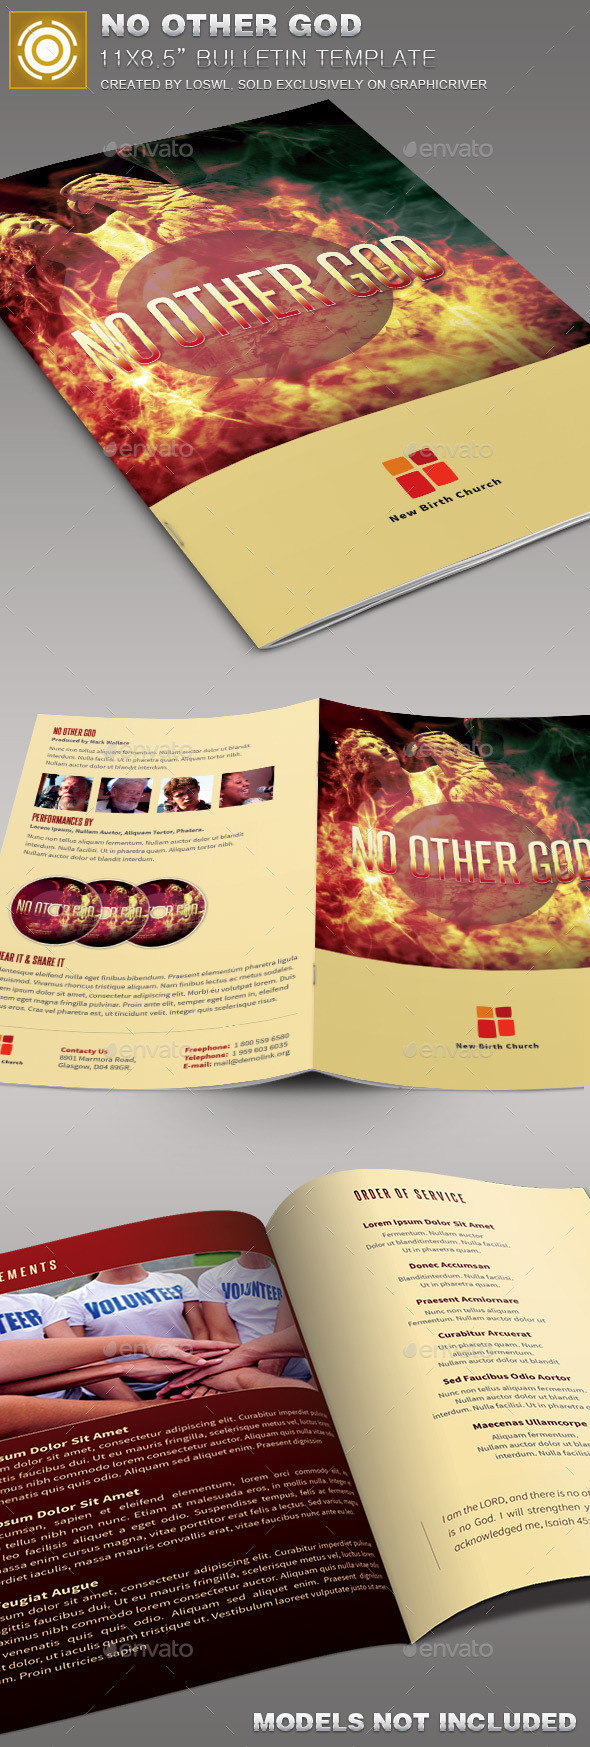 No other god church bulletin template image preview 1